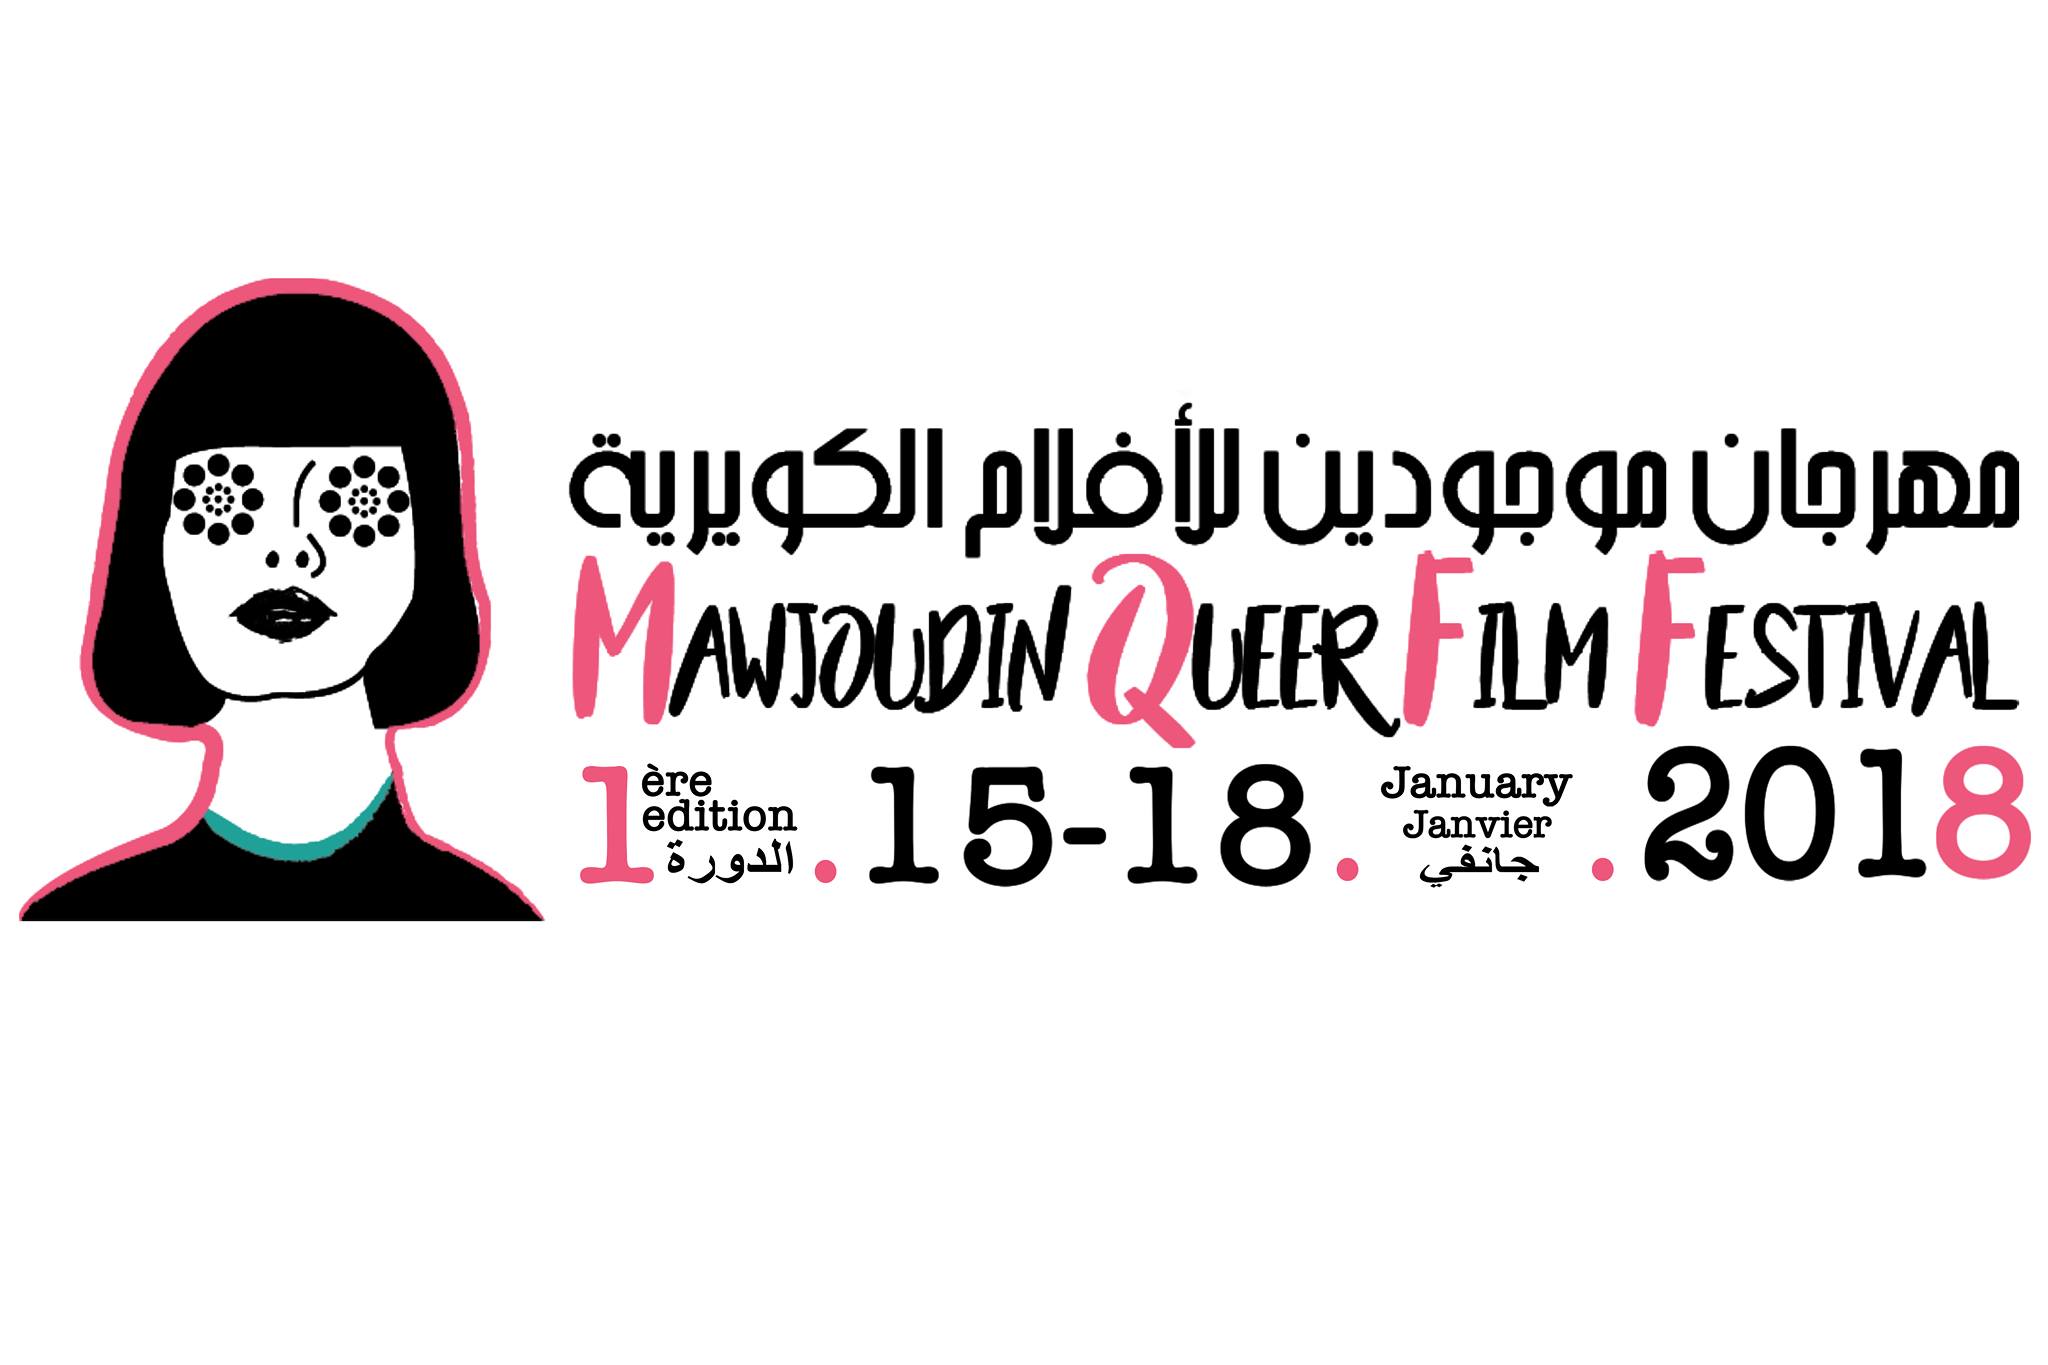 The Mawjoudin Queer Film Festival in Tunisia features 12 movies from Africa and the Middle East that address LGBTQI issues.